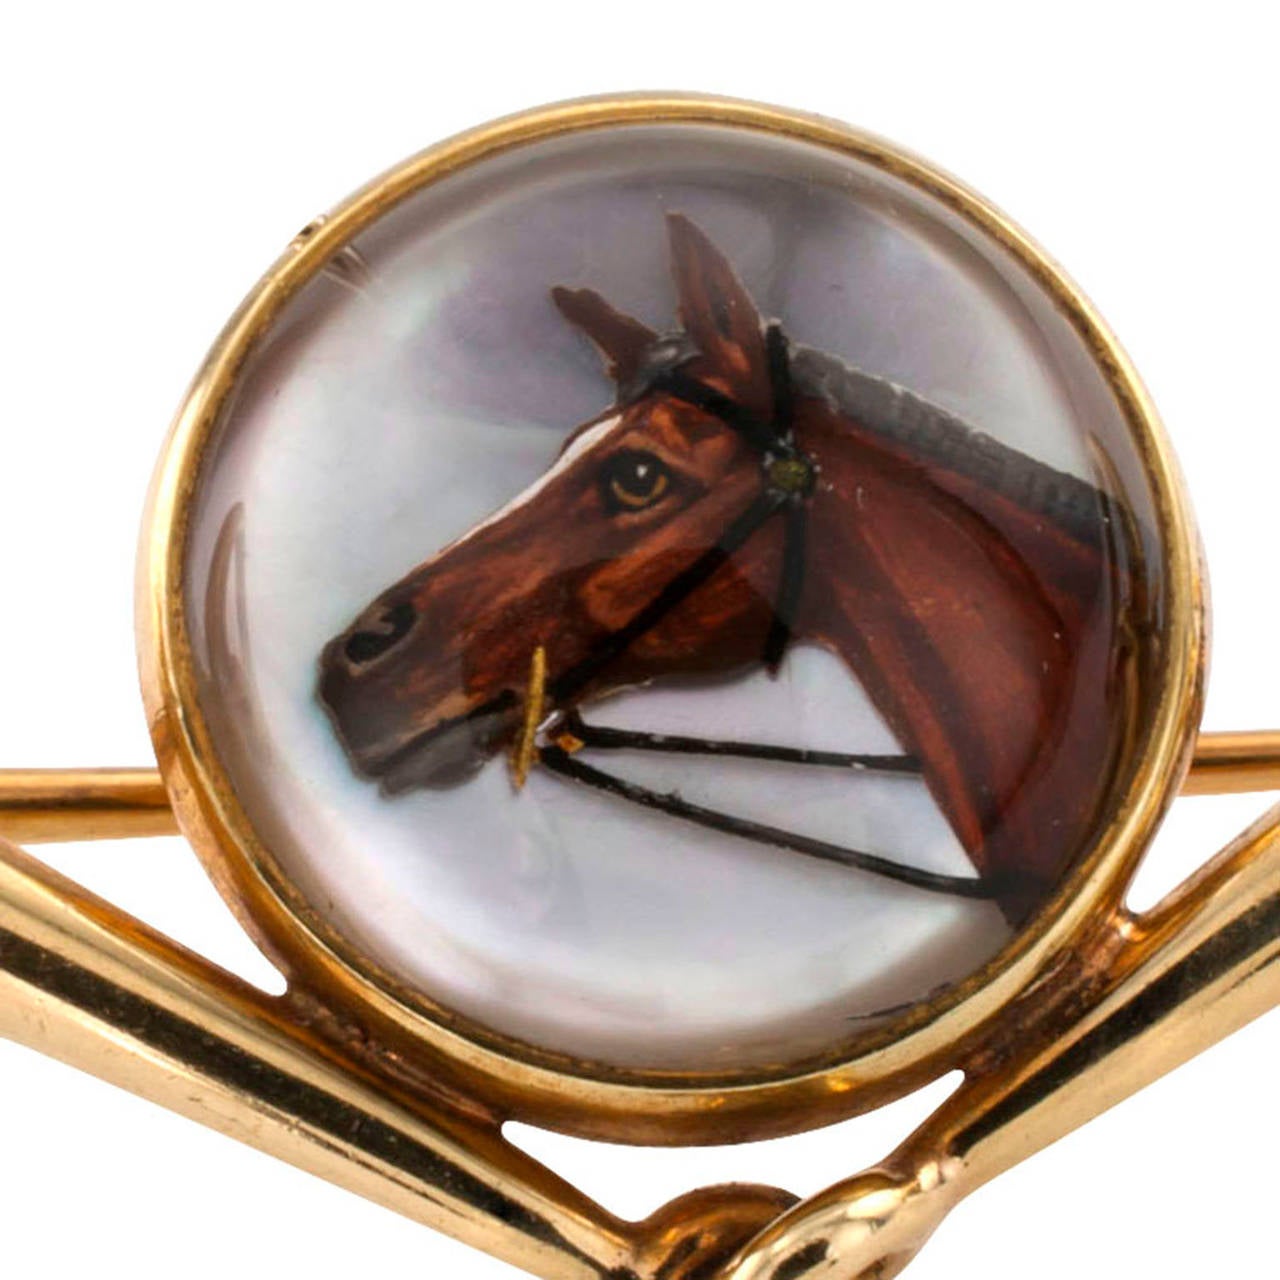 Early 20th Century Equestrian Essex Crystal Brooch

This lovely brooch centers upon a circular reverse carved rock crystal portrait depicting the head profile of an elite horse, supported by a set of horse bits, crafted in 14 karat gold, very well